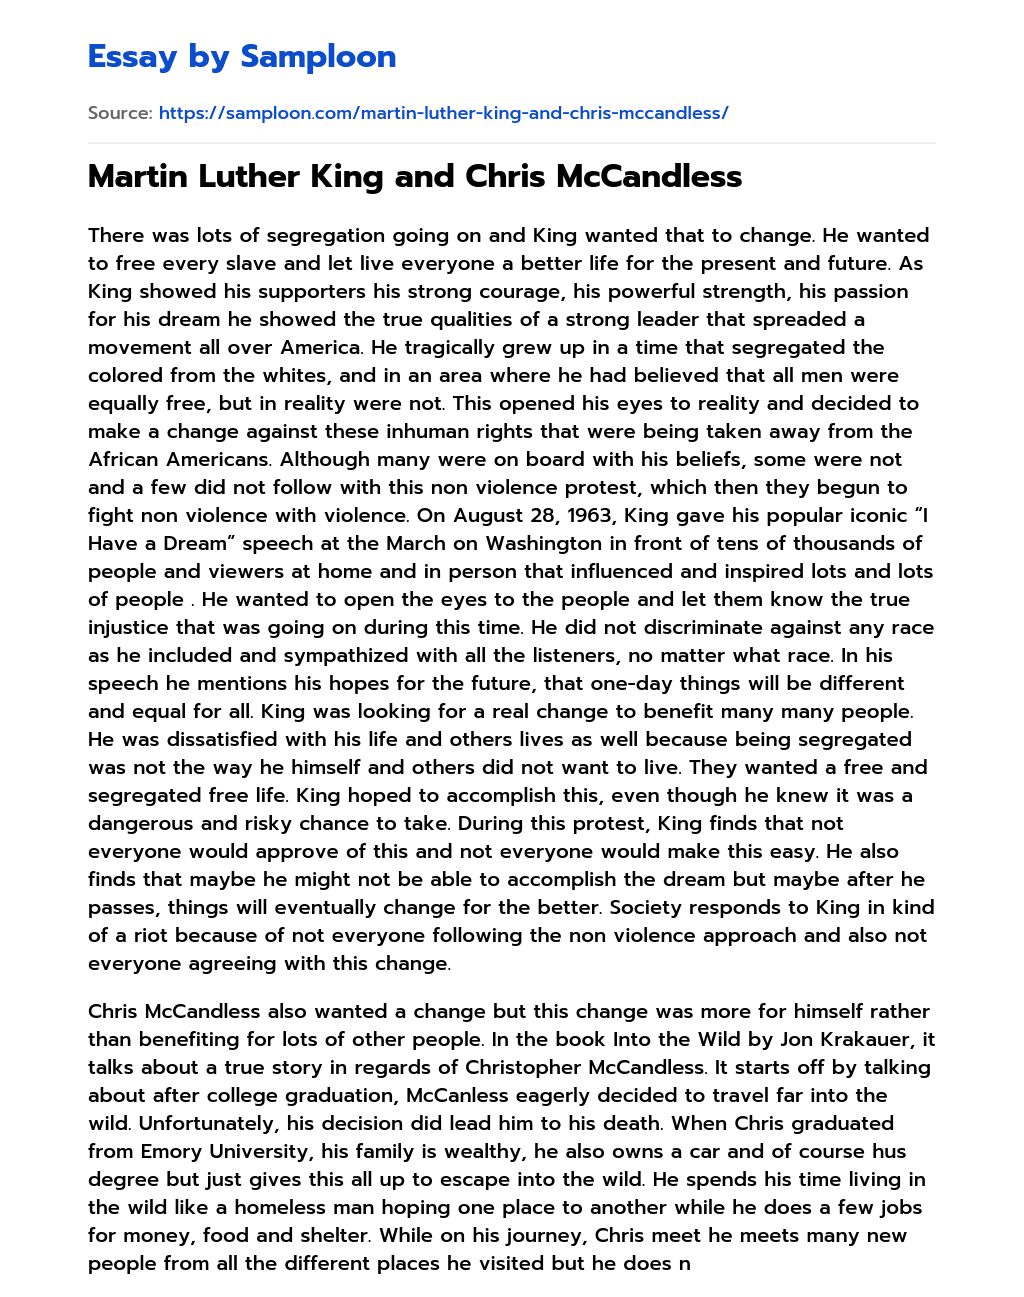 Martin Luther King and Chris McCandless essay